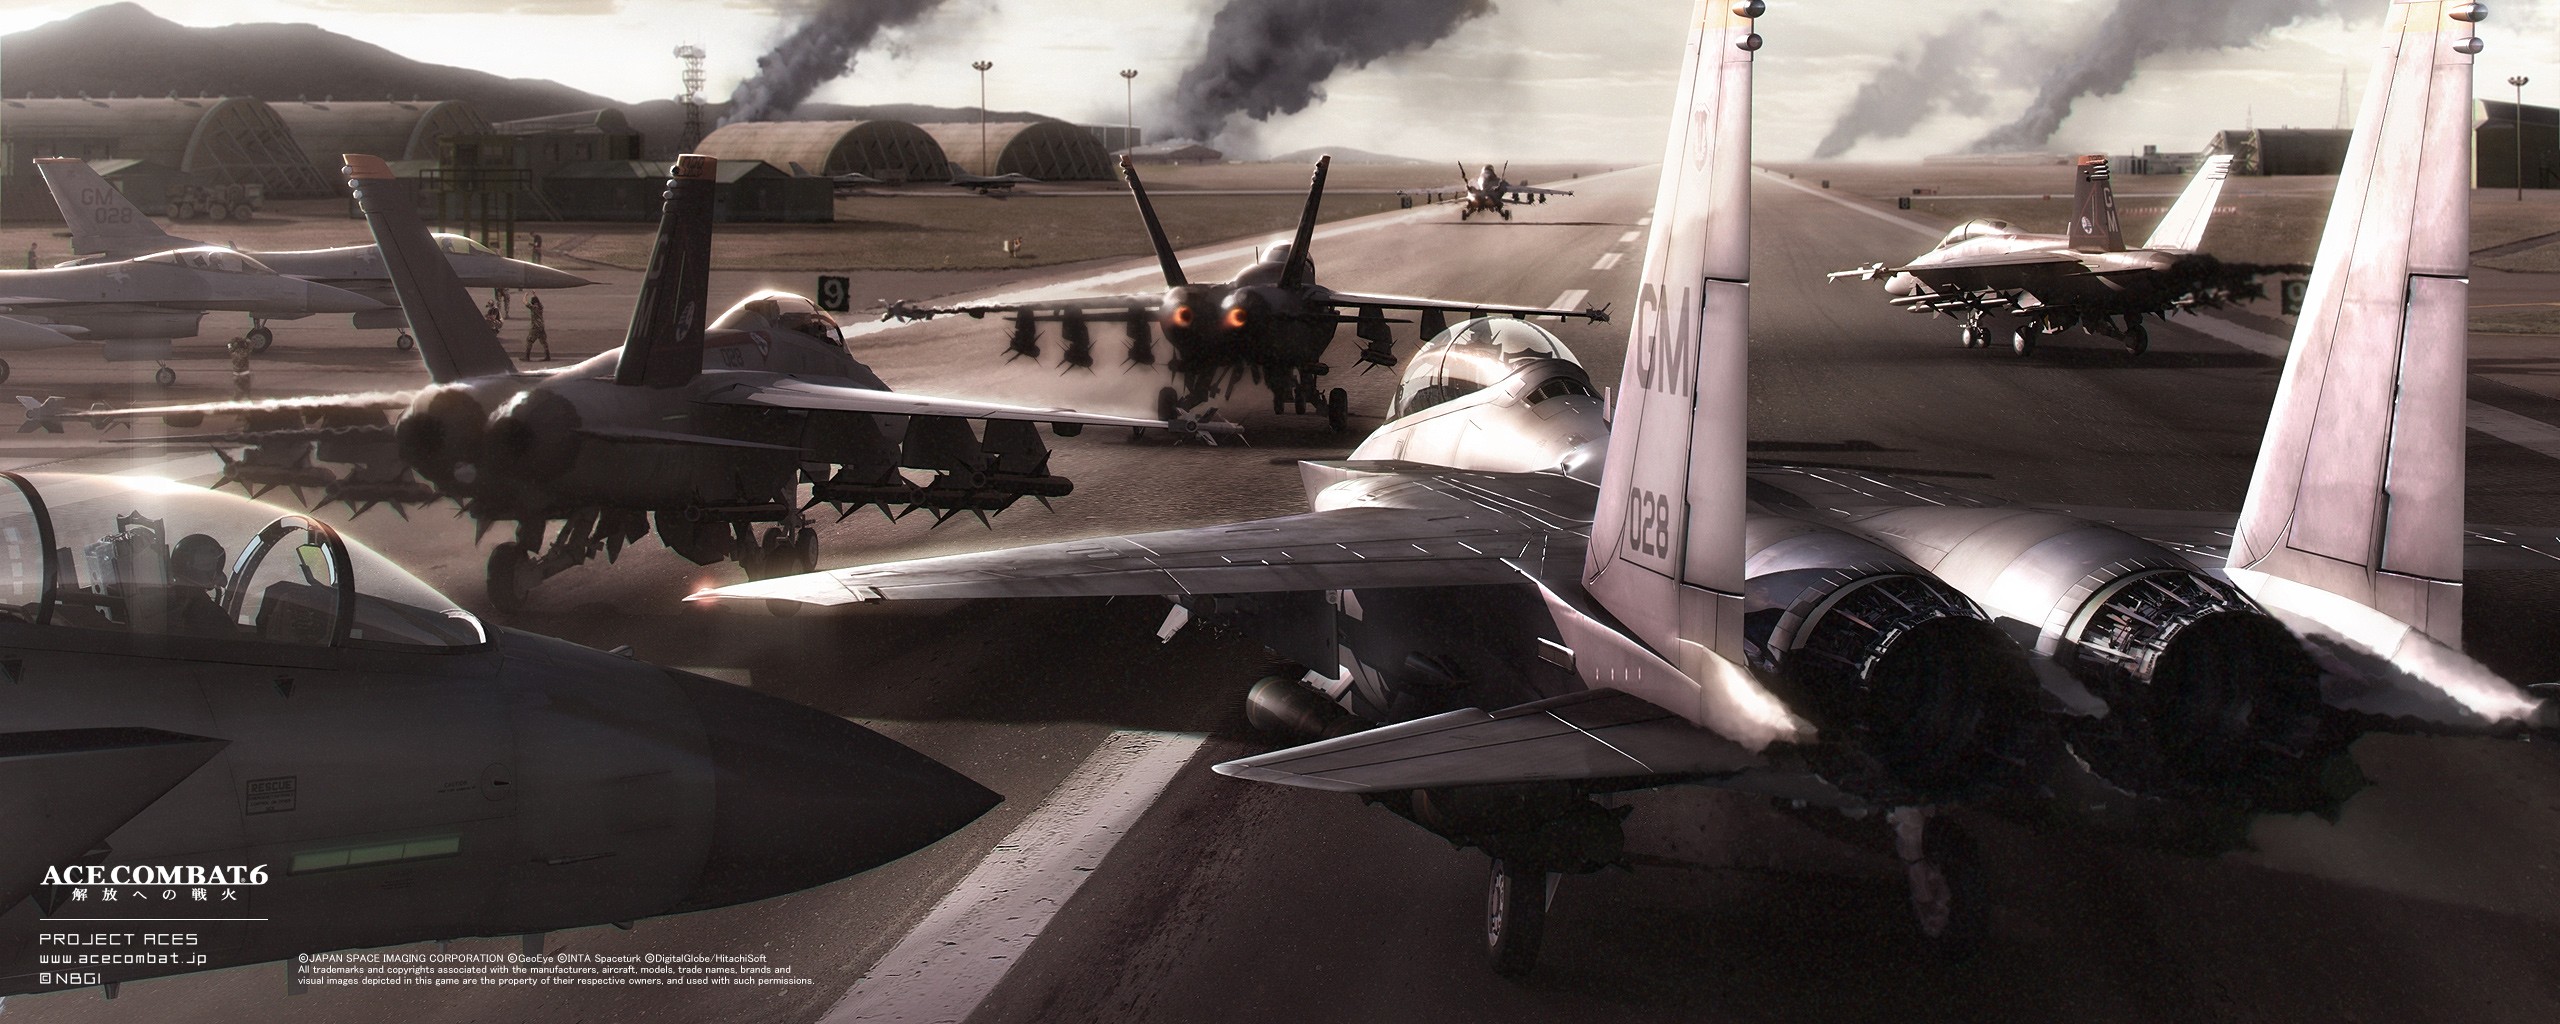 Ace Combat 6: Fires Of Liberation, Video Games, Aircraft, F 15 Strike Eagle, FA 18 Hornet, General Dynamics F 16 Fighting Falcon, Runway Wallpaper